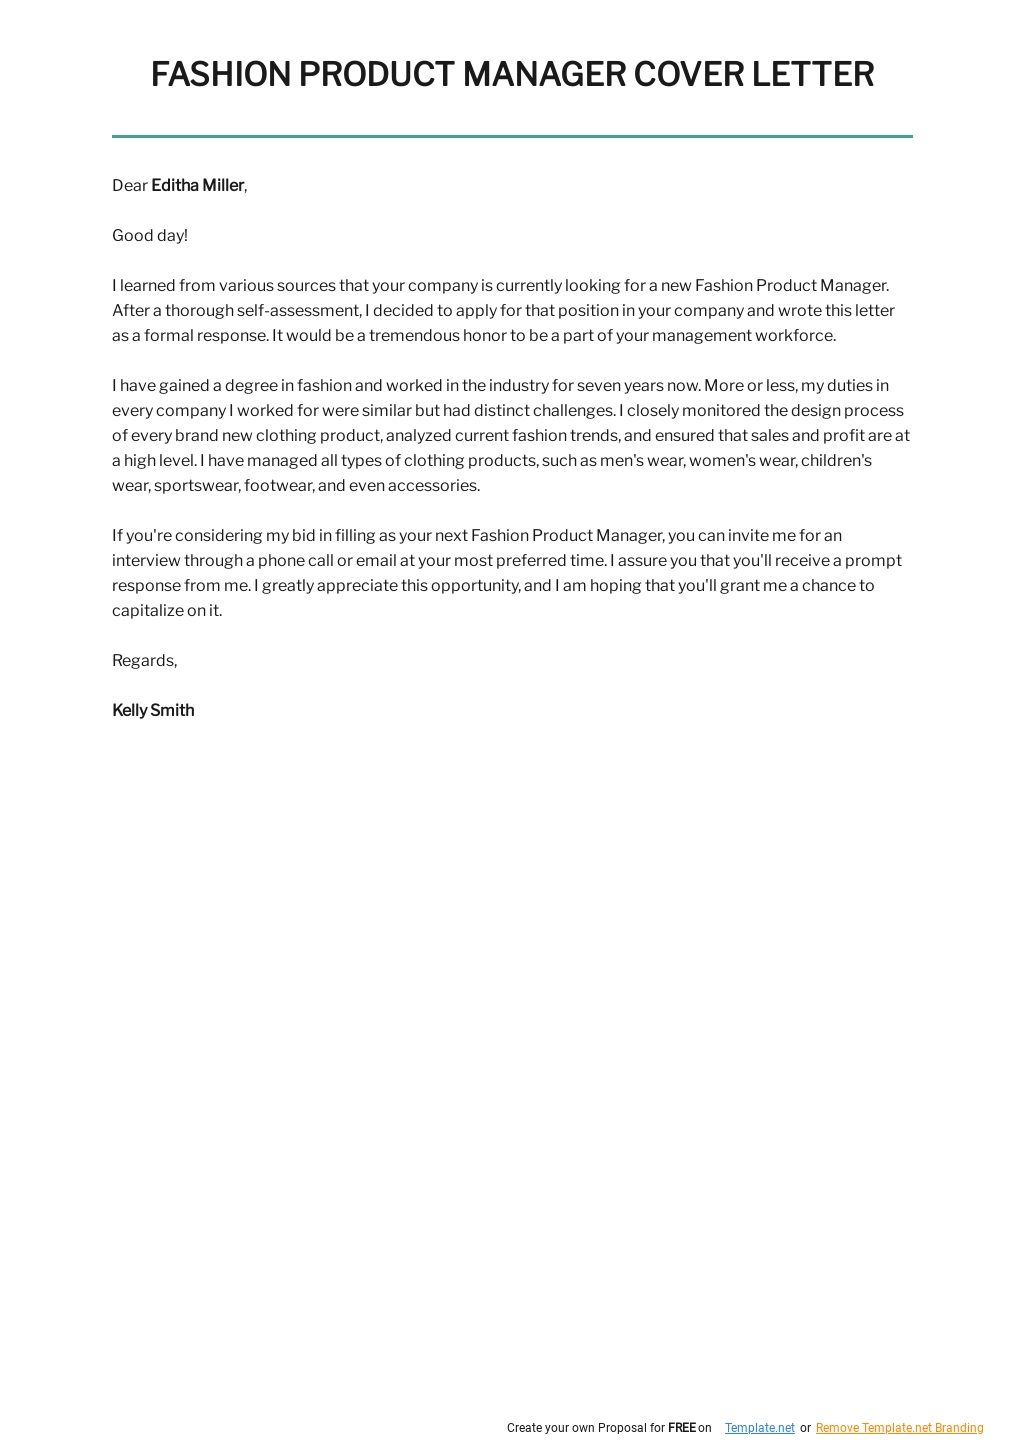 Fashion Product Manager Cover Letter Template.jpe